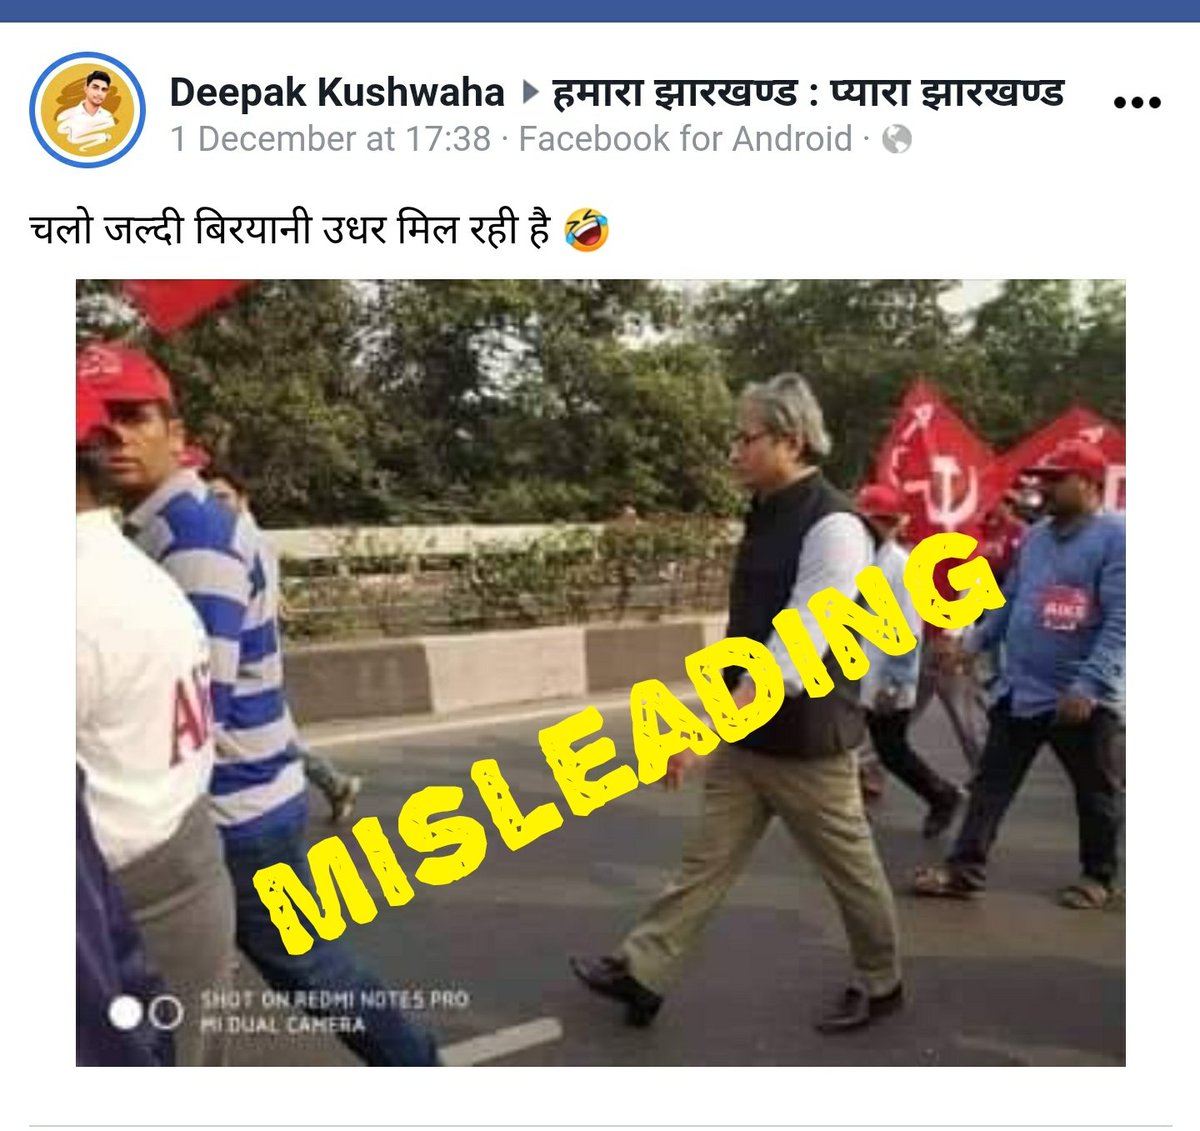 A photograph of journalist Ravish Kumar covering farmers' protest in 2018 has been falsely shared as him participating in the recent agitation.  #AltNewsFactCheck 9/n https://www.altnews.in/ravish-kumars-photo-covering-2018-farmers-protest-shared-as-him-joining-recent-movement/?utm_source=website&utm_medium=social-media&utm_campaign=newpost